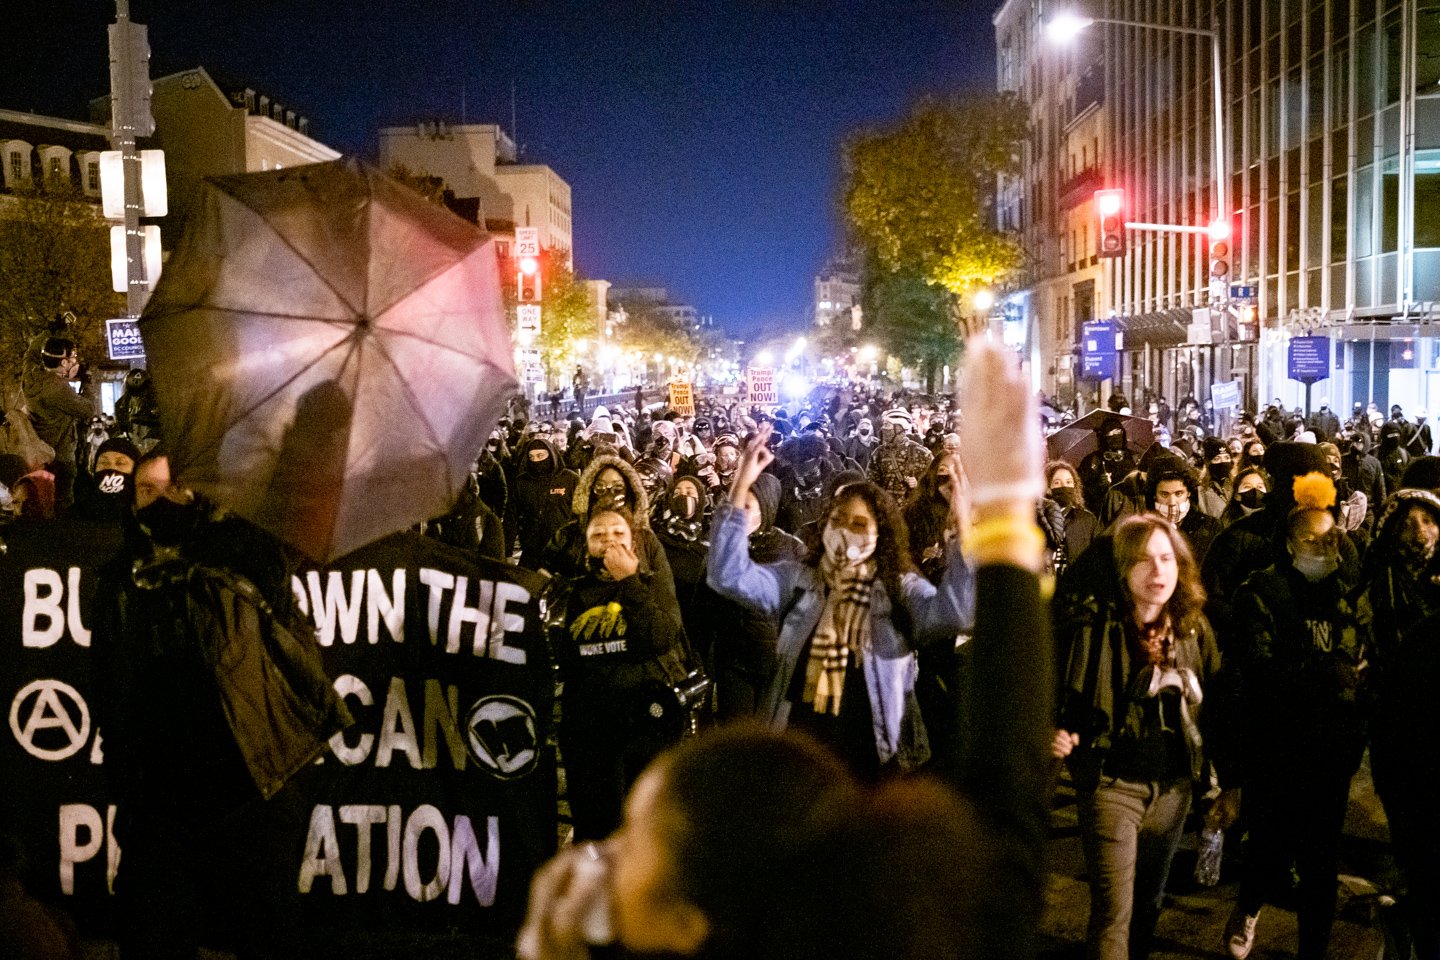  Early in the morning after election night, and with the Presidential race still undecided between Republican President Donald Trump and Democratic Candidate Joe Biden, hundreds of demonstrators marched with local organizers from Black Lives Matter P